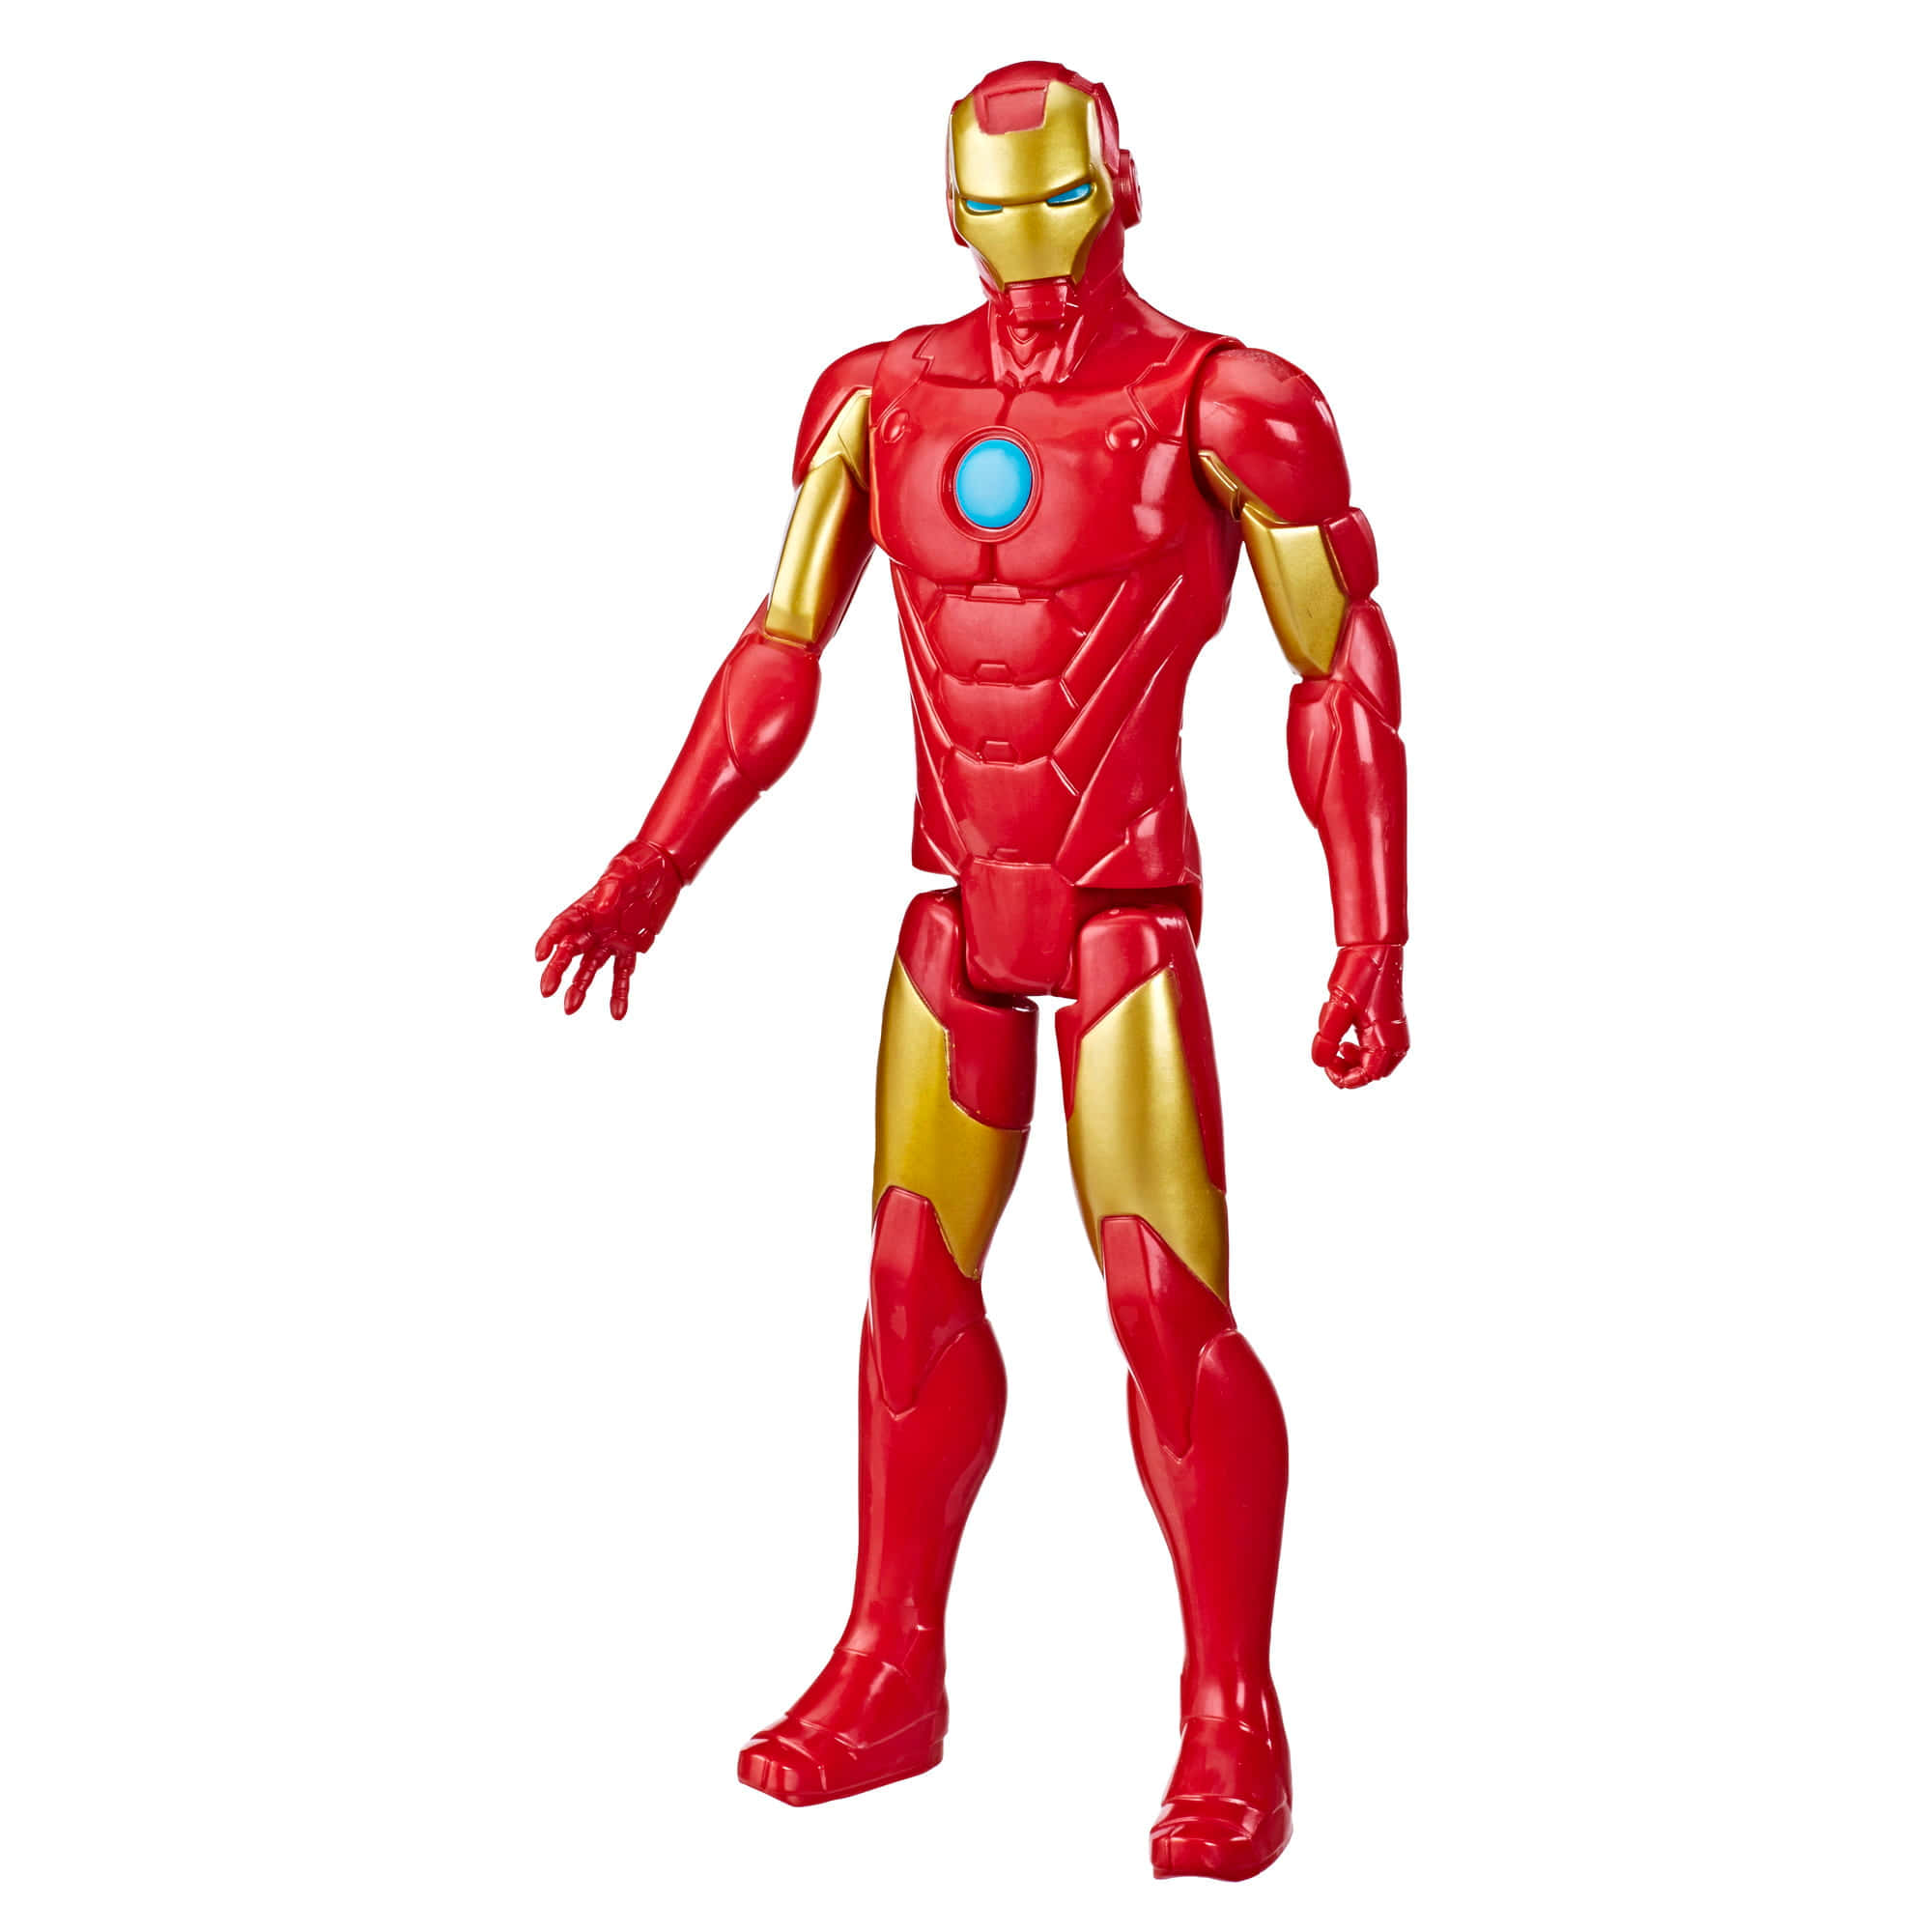 Power up your child's imagination with Iron Man Action Figures Wallpaper